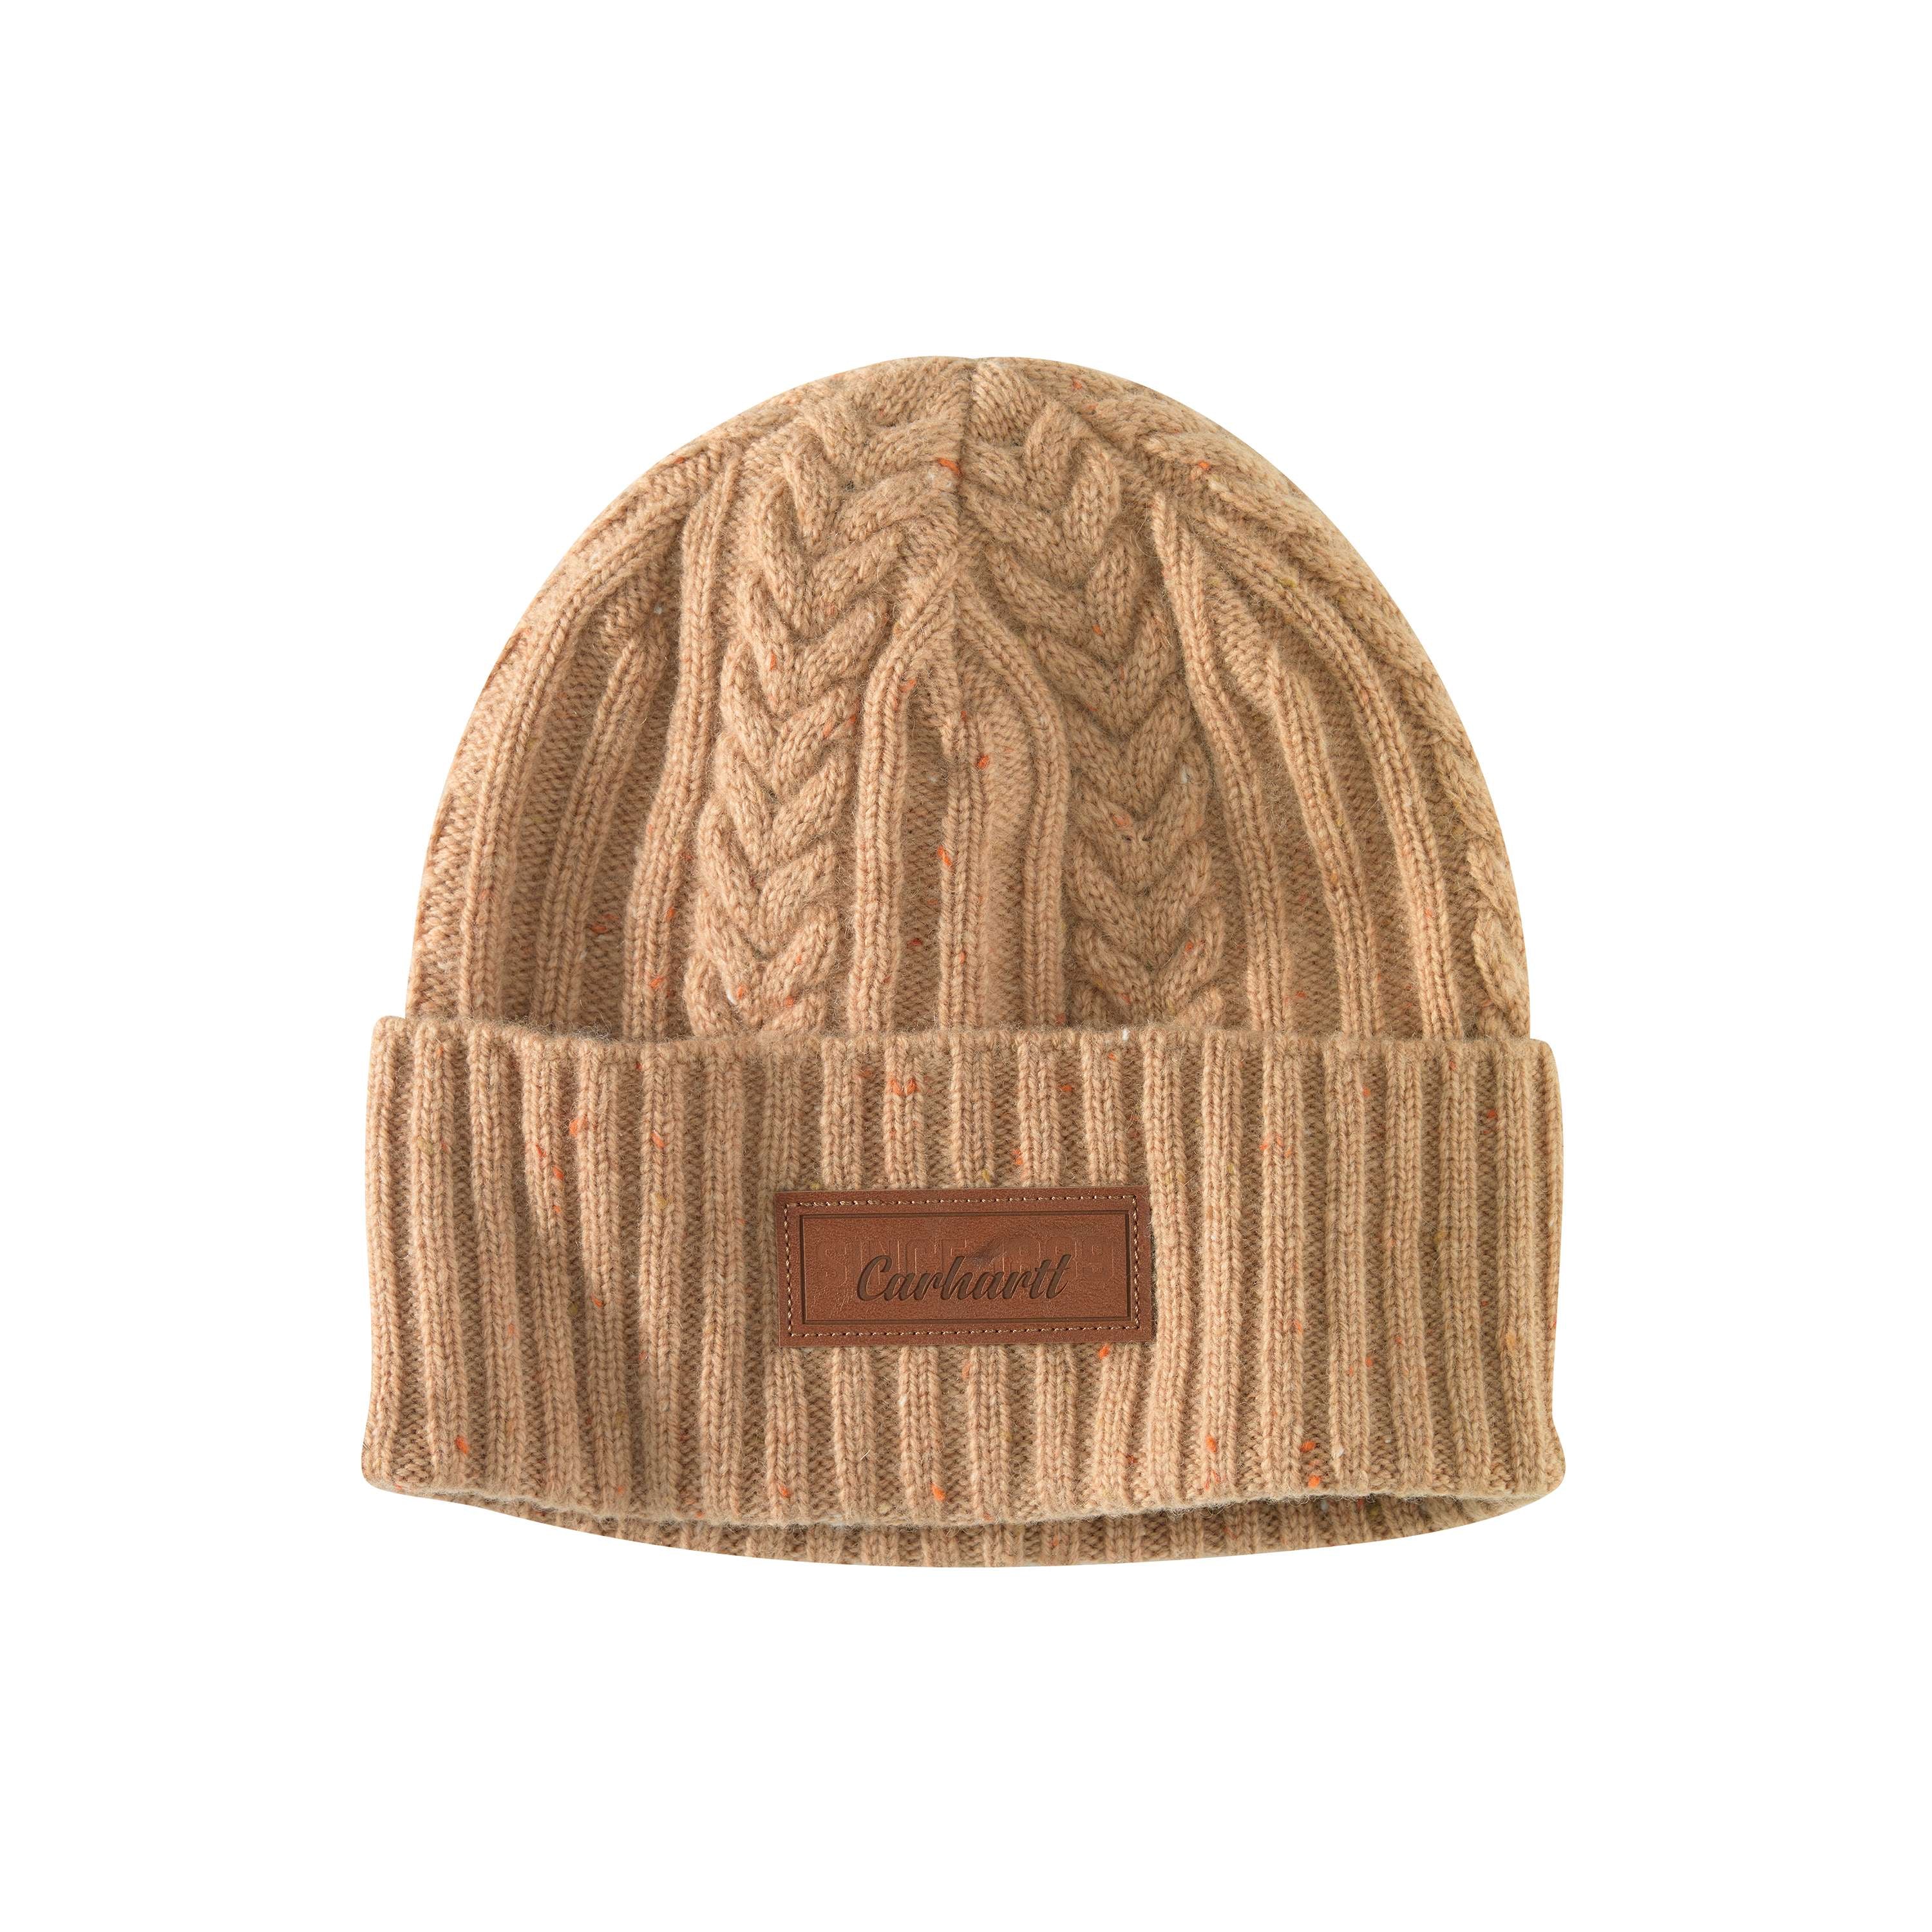 105561 - WOMEN'S RIB KNIT FISHERMAN BEANIE – Marshlands Canada Factory  Outlet